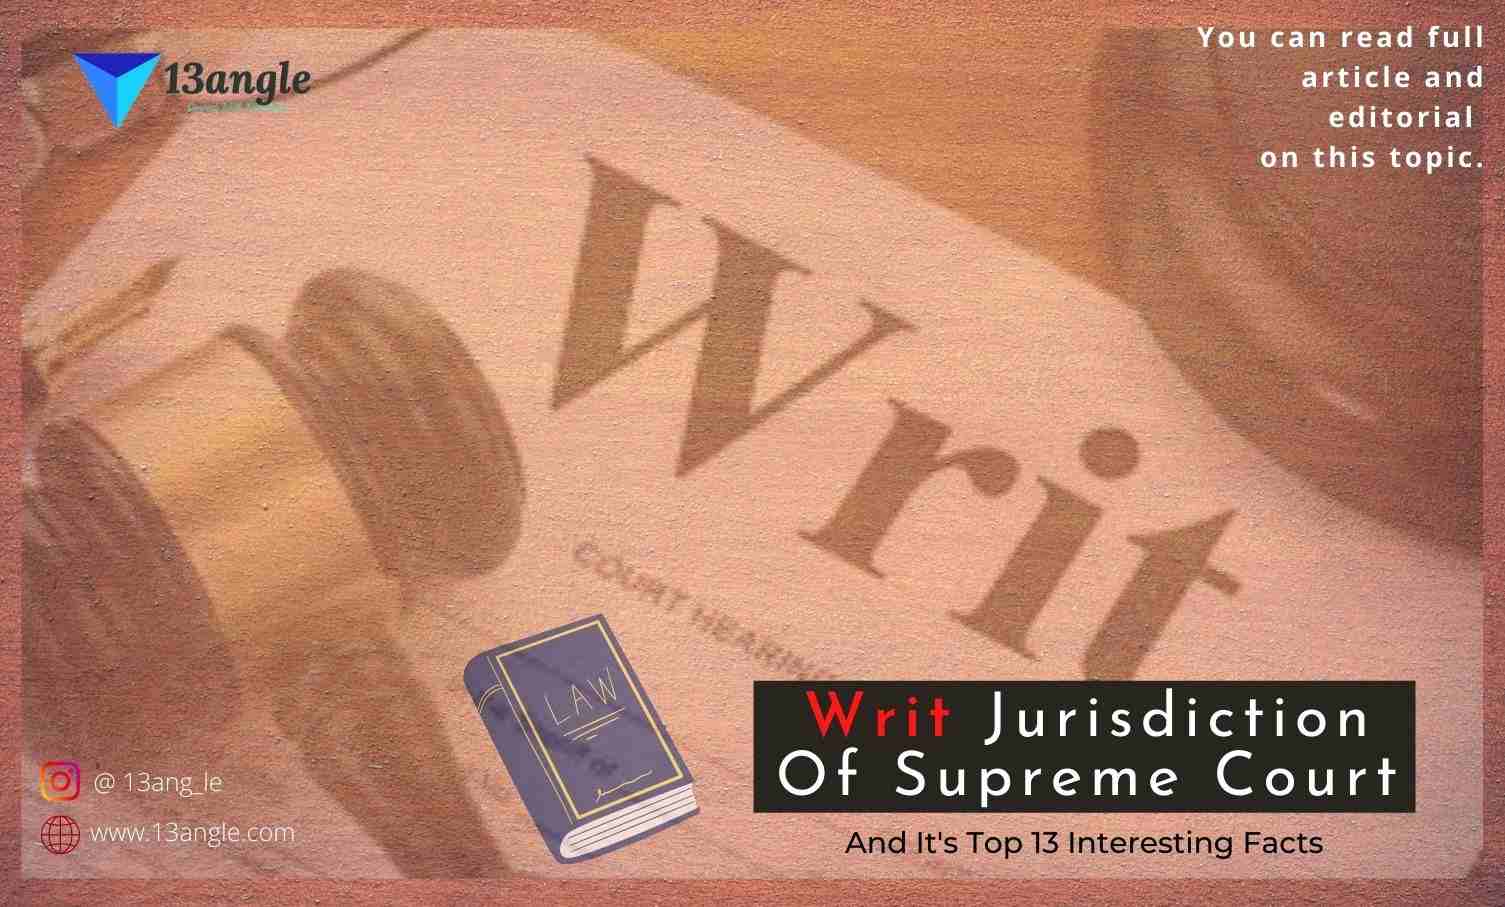 Is The High Court s Power To Issue Writs Wider Than That Of The Supreme